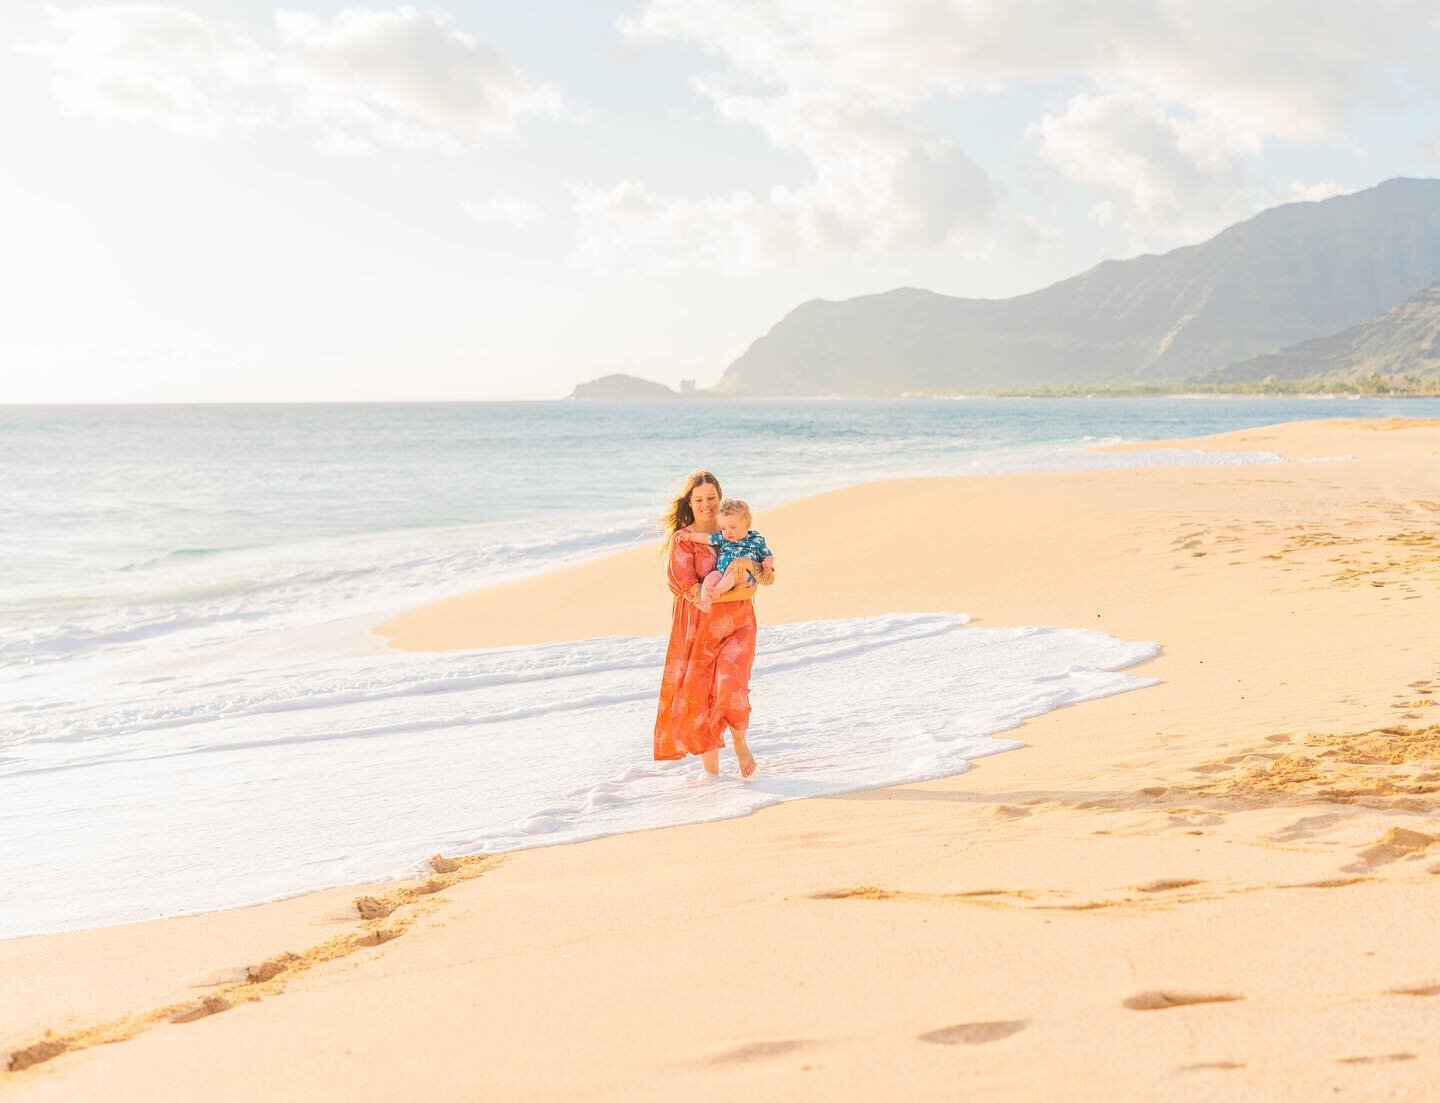 You guys!! The sea foam, the colors, this sweet momma and her son. These moments are precious! 🤩🌊😍

#oahuhawaii #visitoahuhawaii #oahufamilyphotographer #oahufamilyphotos #oahumaternityphotographer #oahuhoneymoon #honolulufamilyphotographer #honol